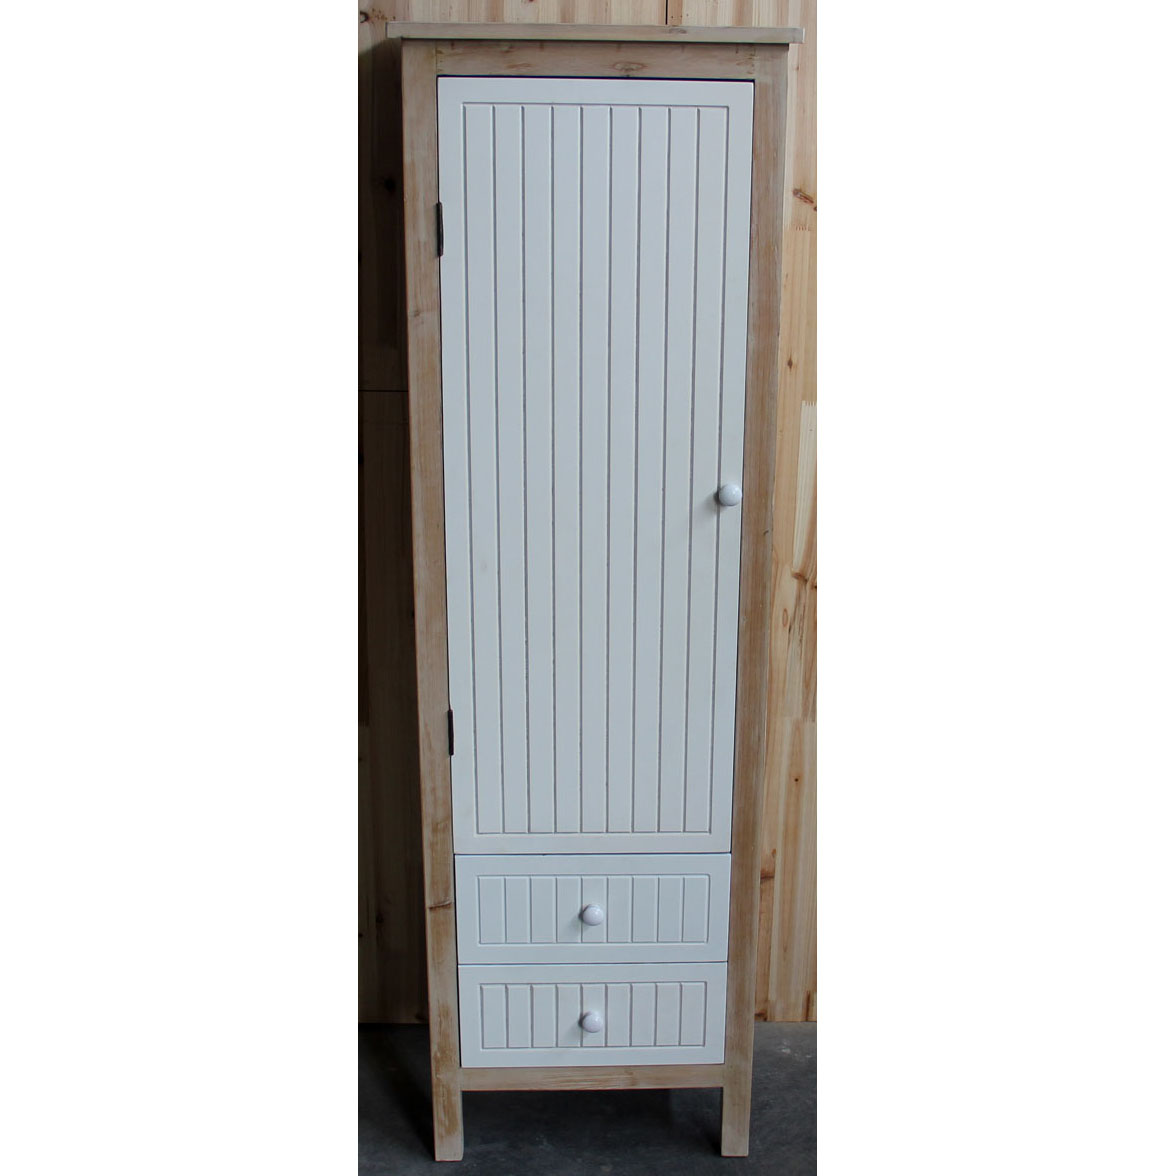 Sand wash wood cabinet with 1 white carving door and 2 drawers